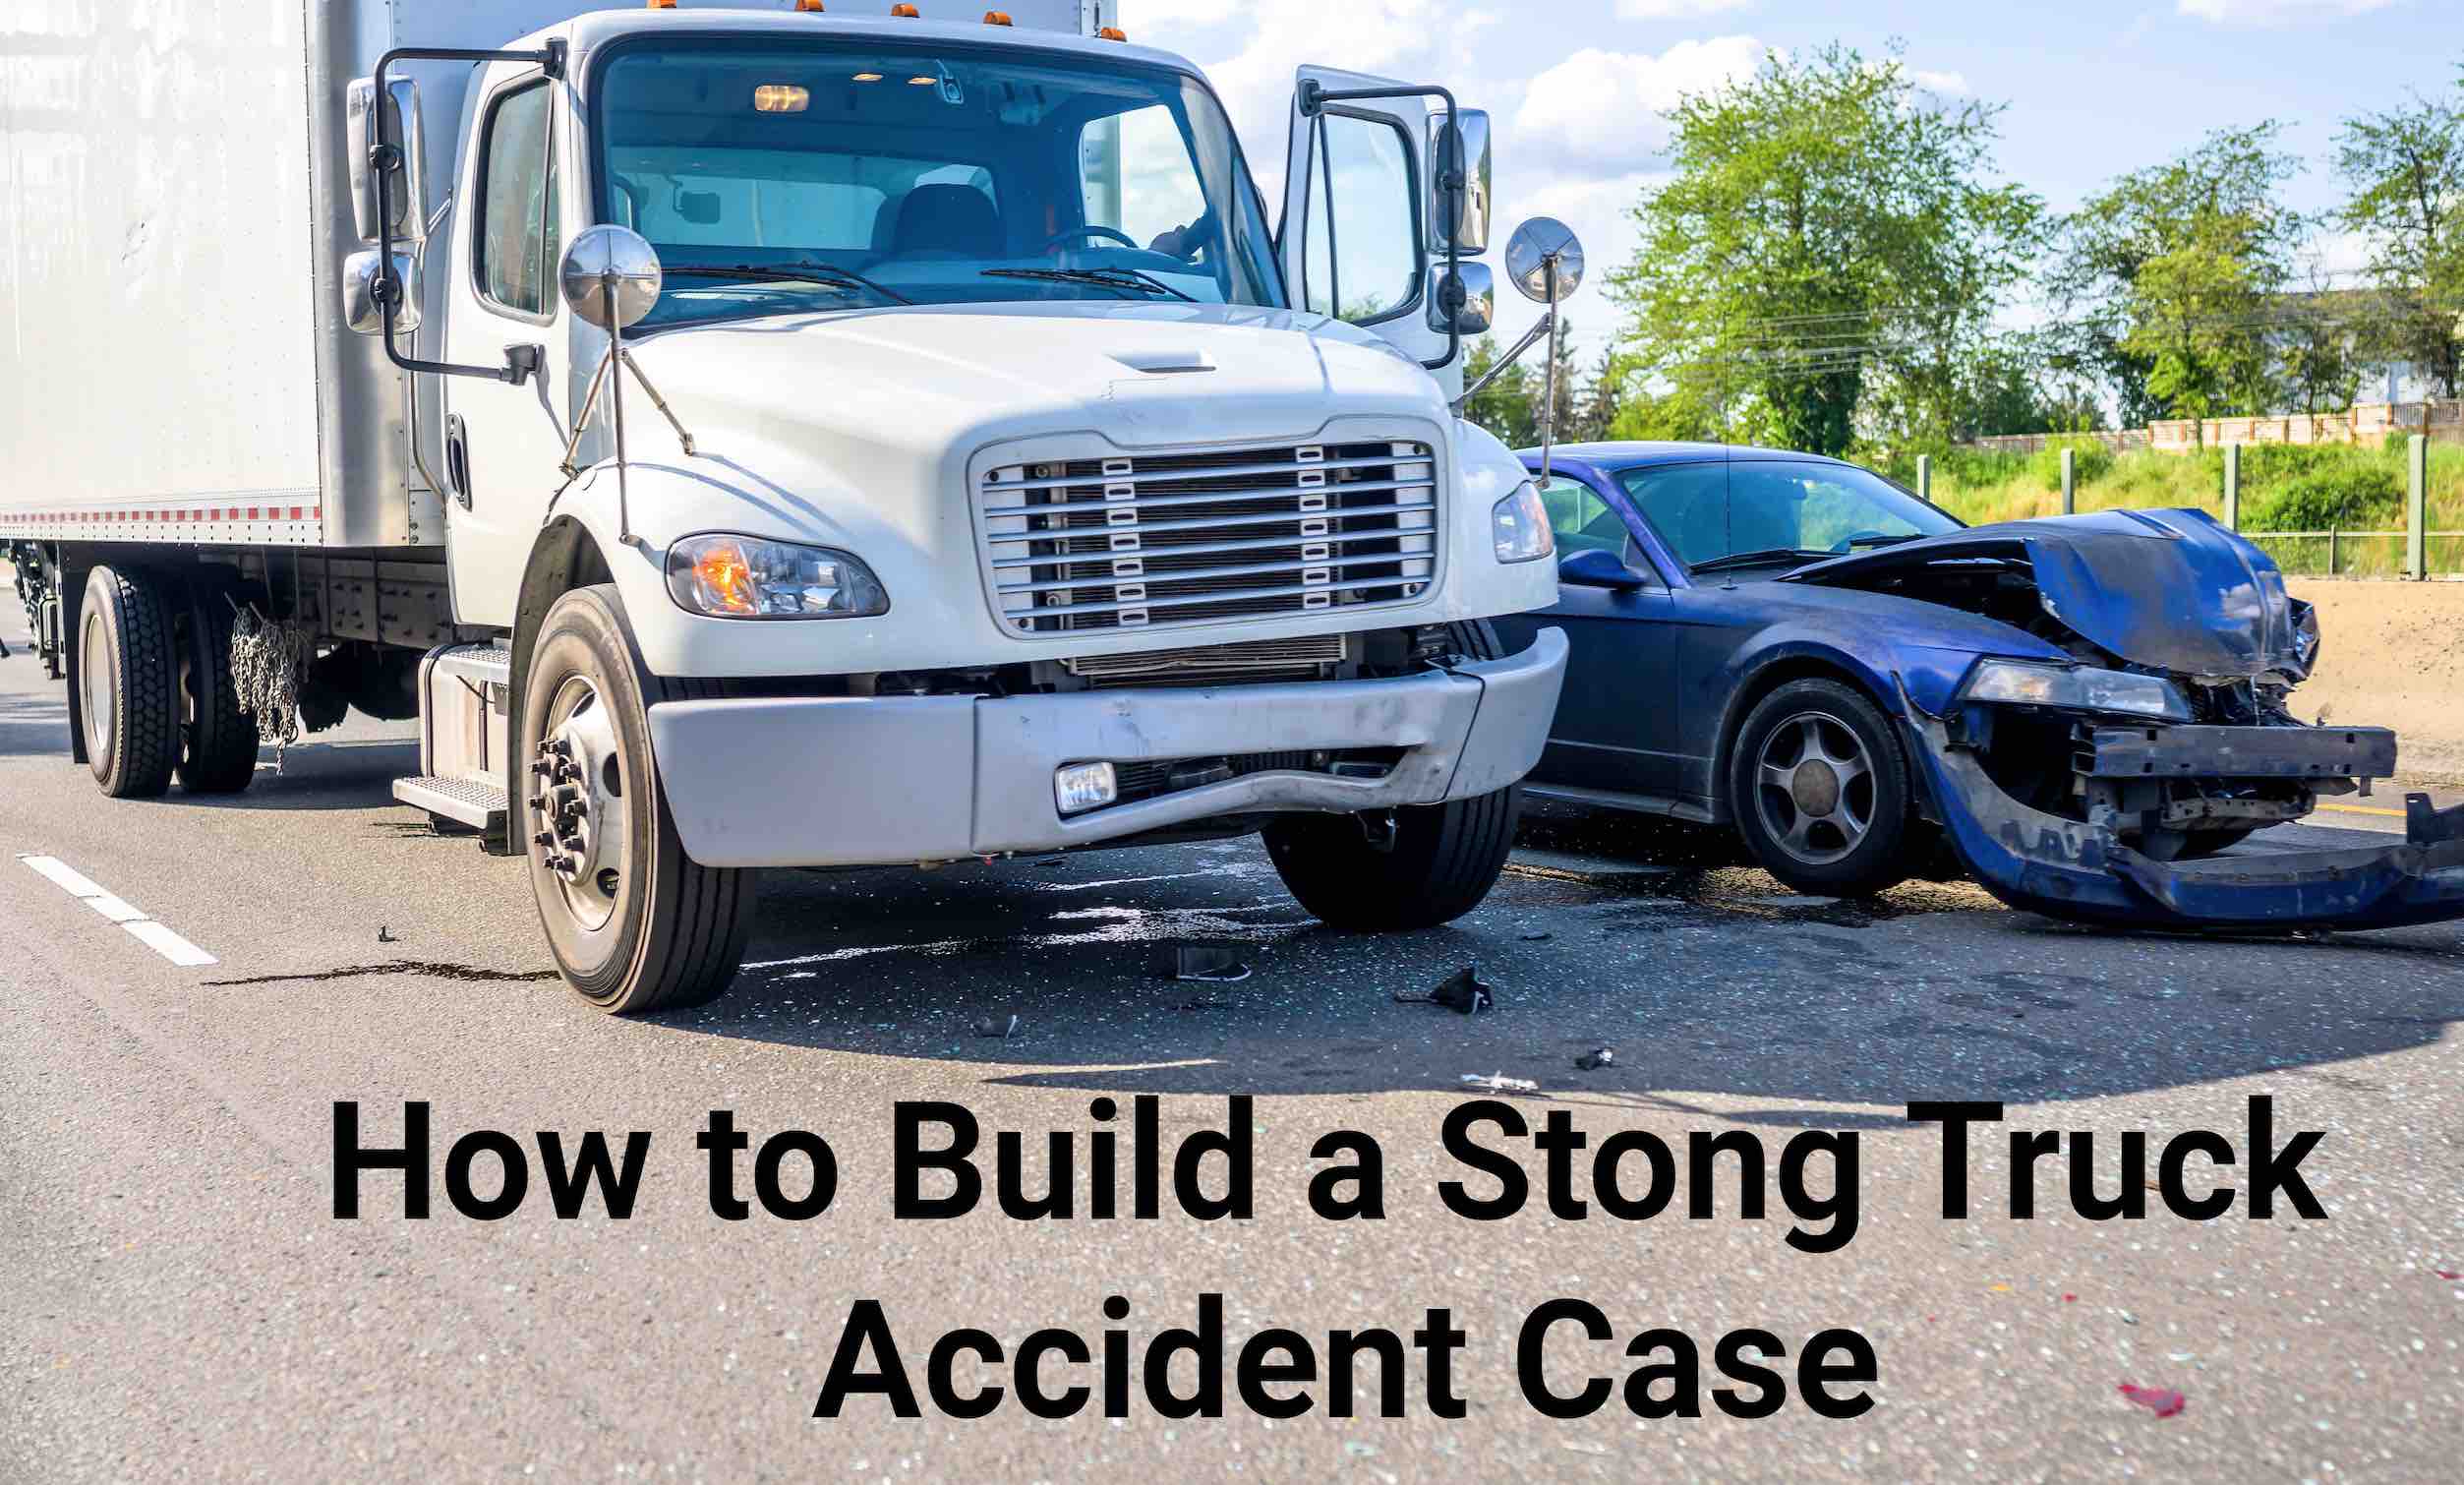 How to build a strong truck accident case